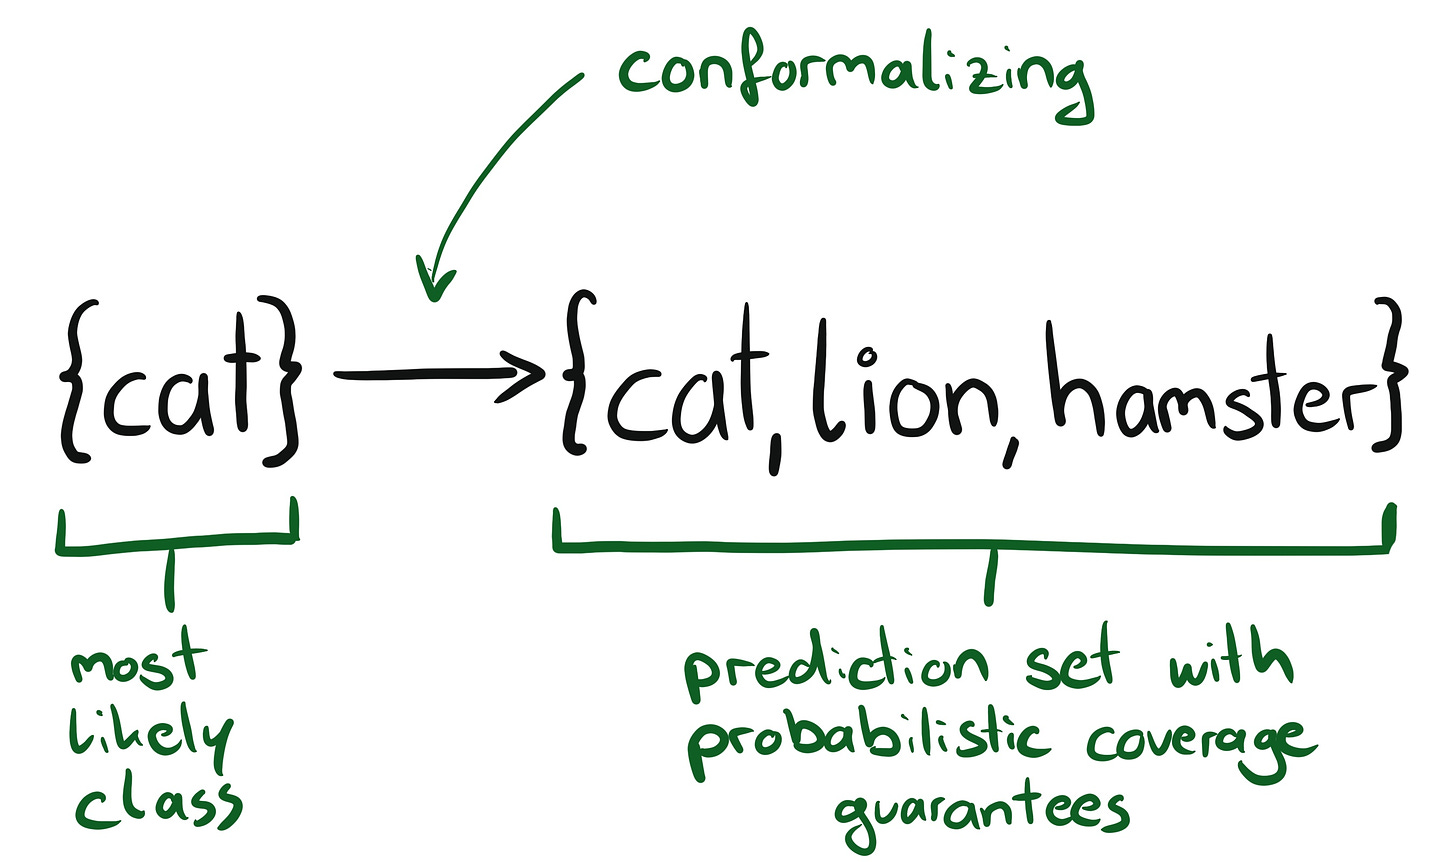 diagram: {cat} -> {cat, lion, t-rex}. cat is labelled the most likely class. the other set is labelled a prediction set with probabilistic coverages guarantees. the arrow is lablled with conformalizing